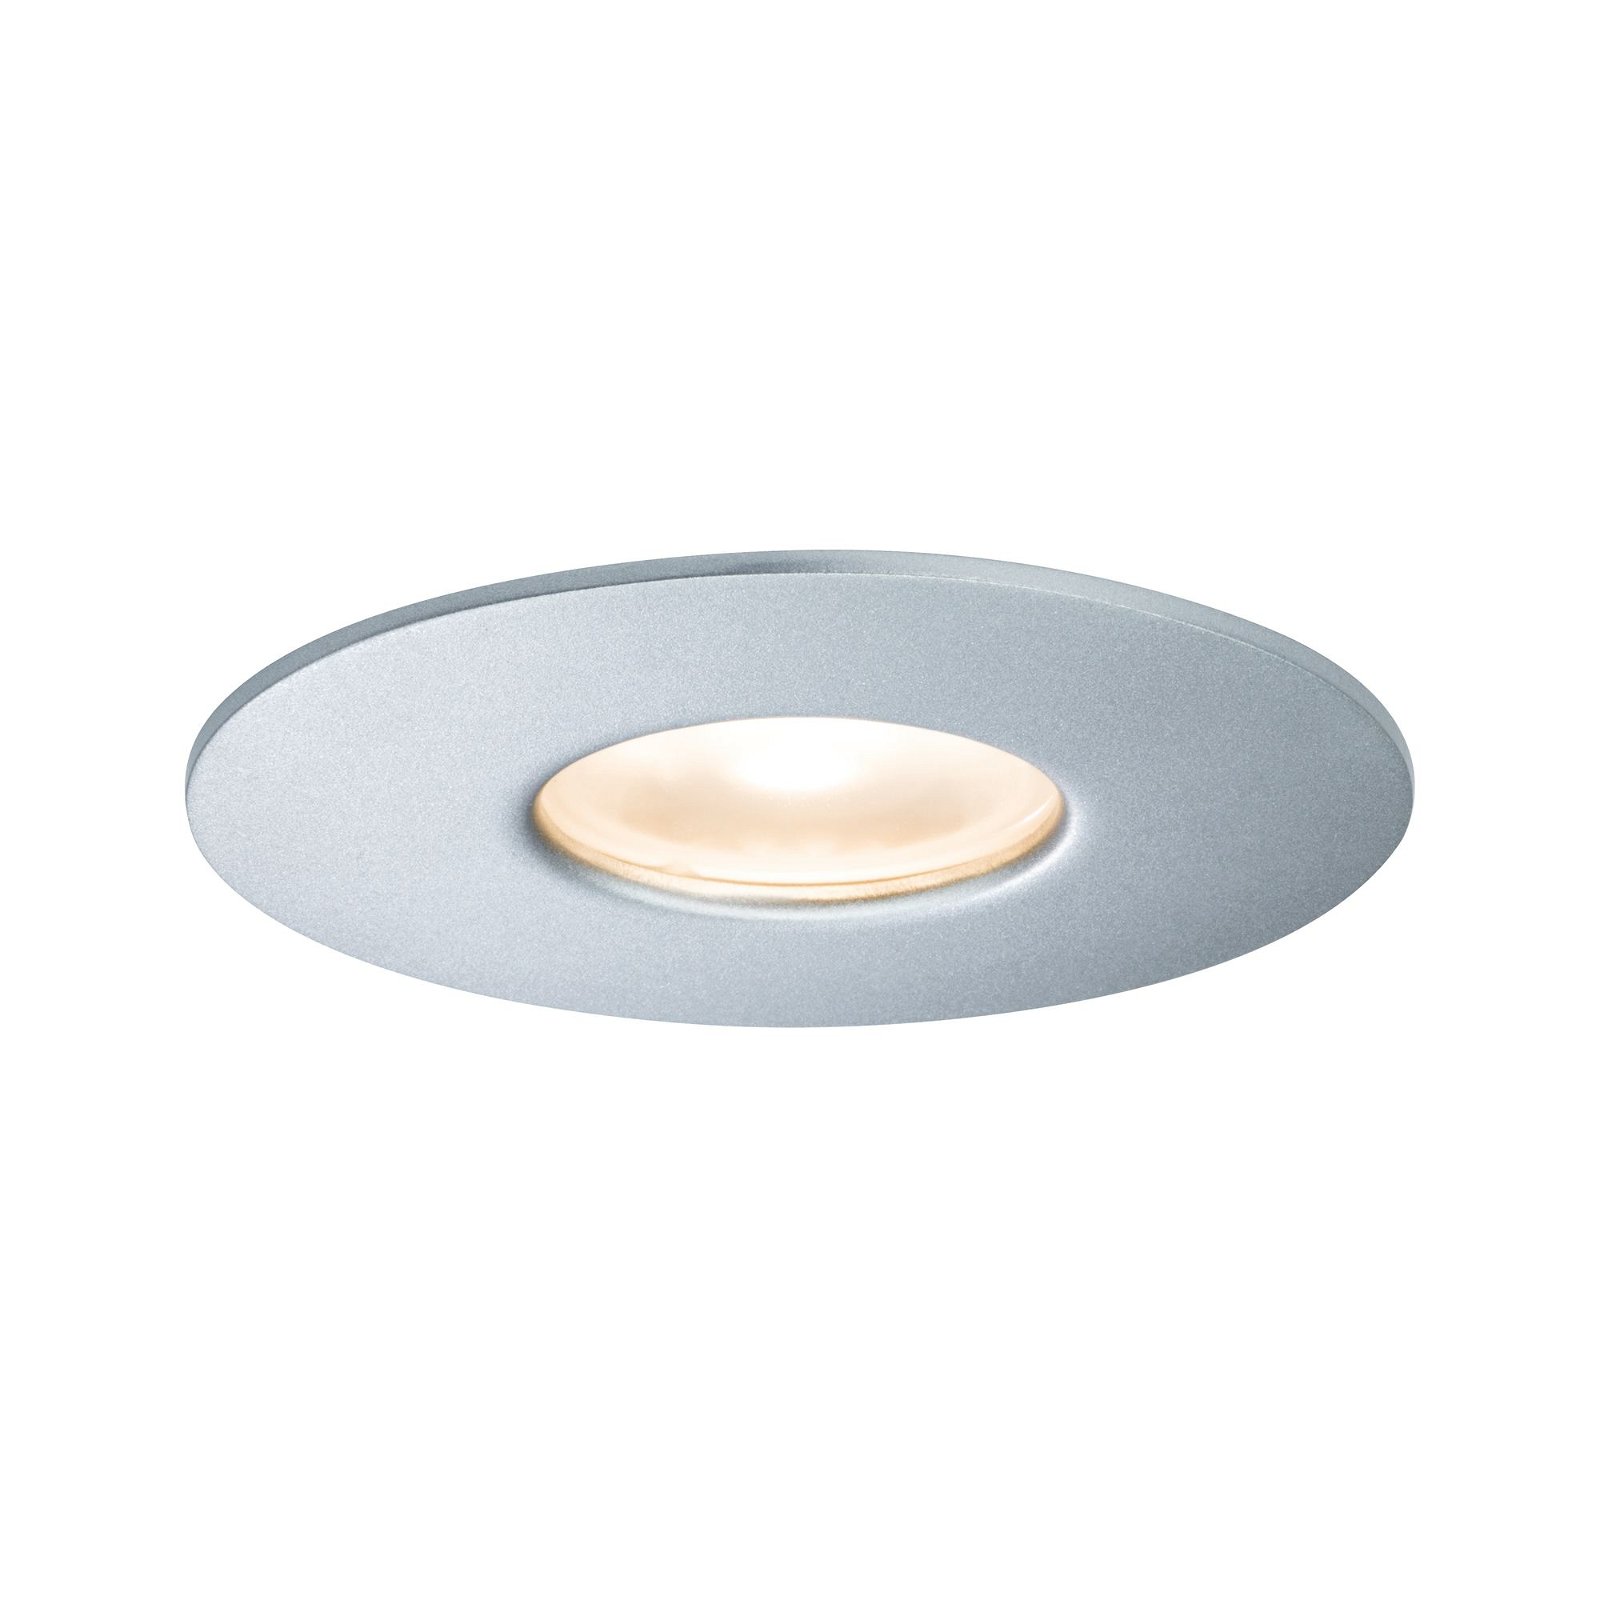 House Outdoor recessed luminaire IP44 round 95mm 3000K 4,4W 410lm 230V Silver Metal/Acrylic